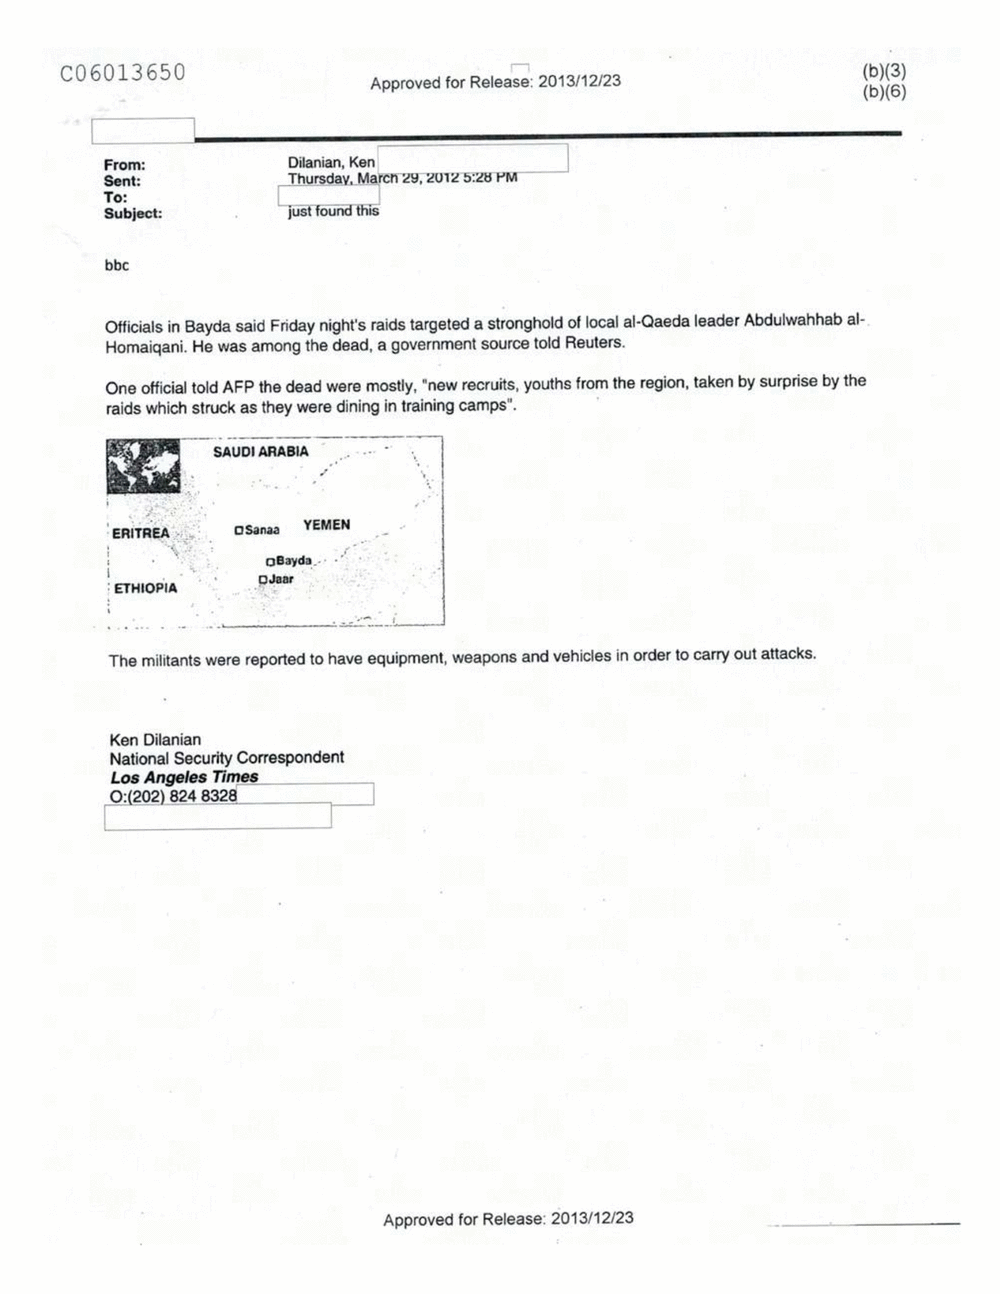 Page 500 from Email Correspondence Between Reporters and CIA Flacks